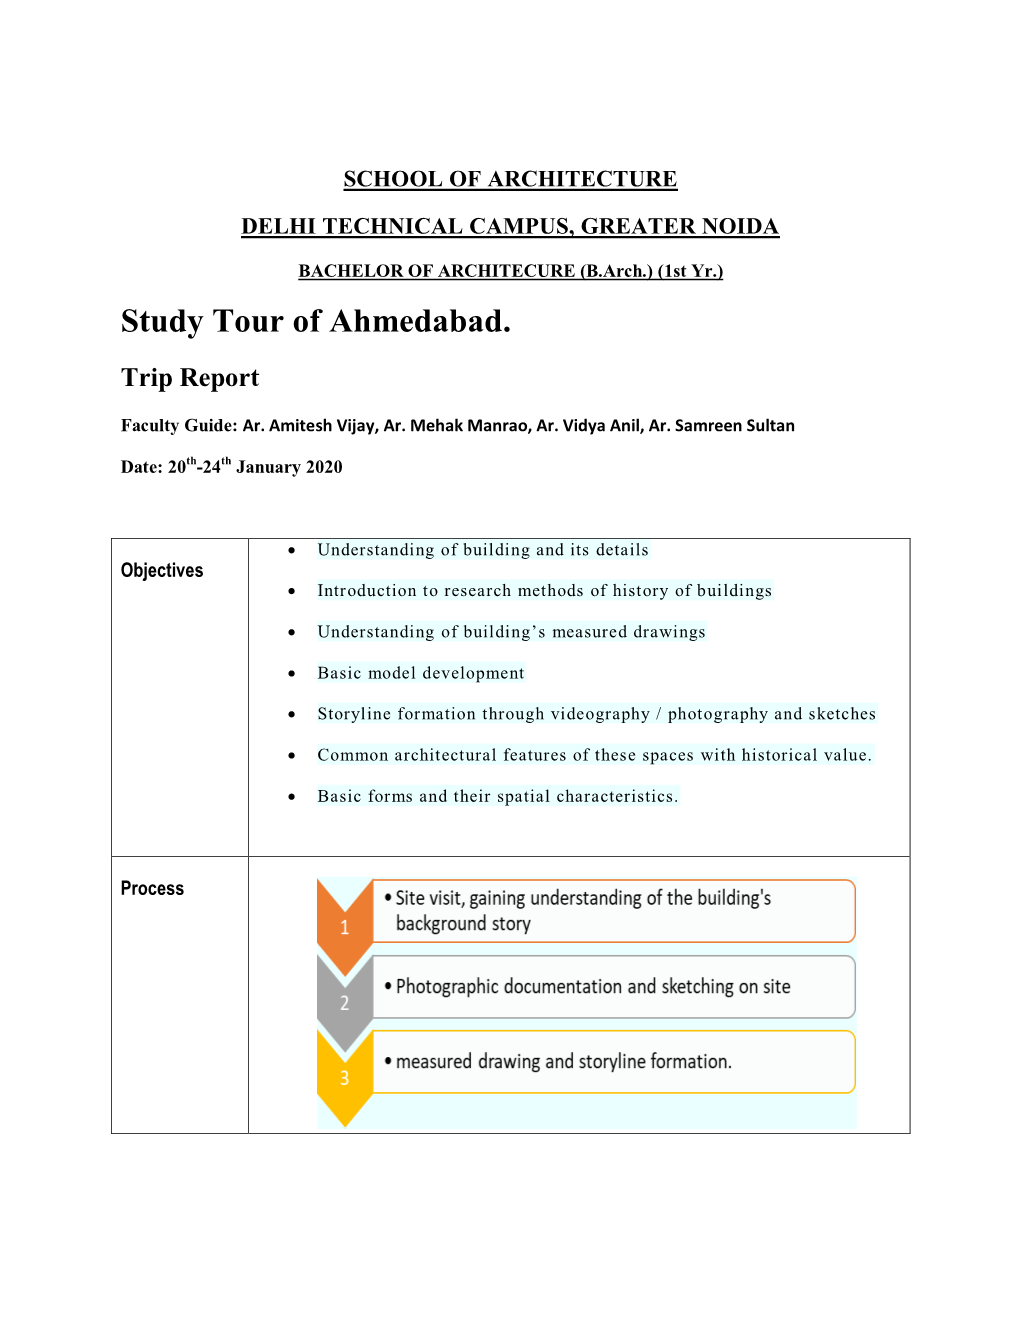 Study Tour of Ahmedabad. Trip Report